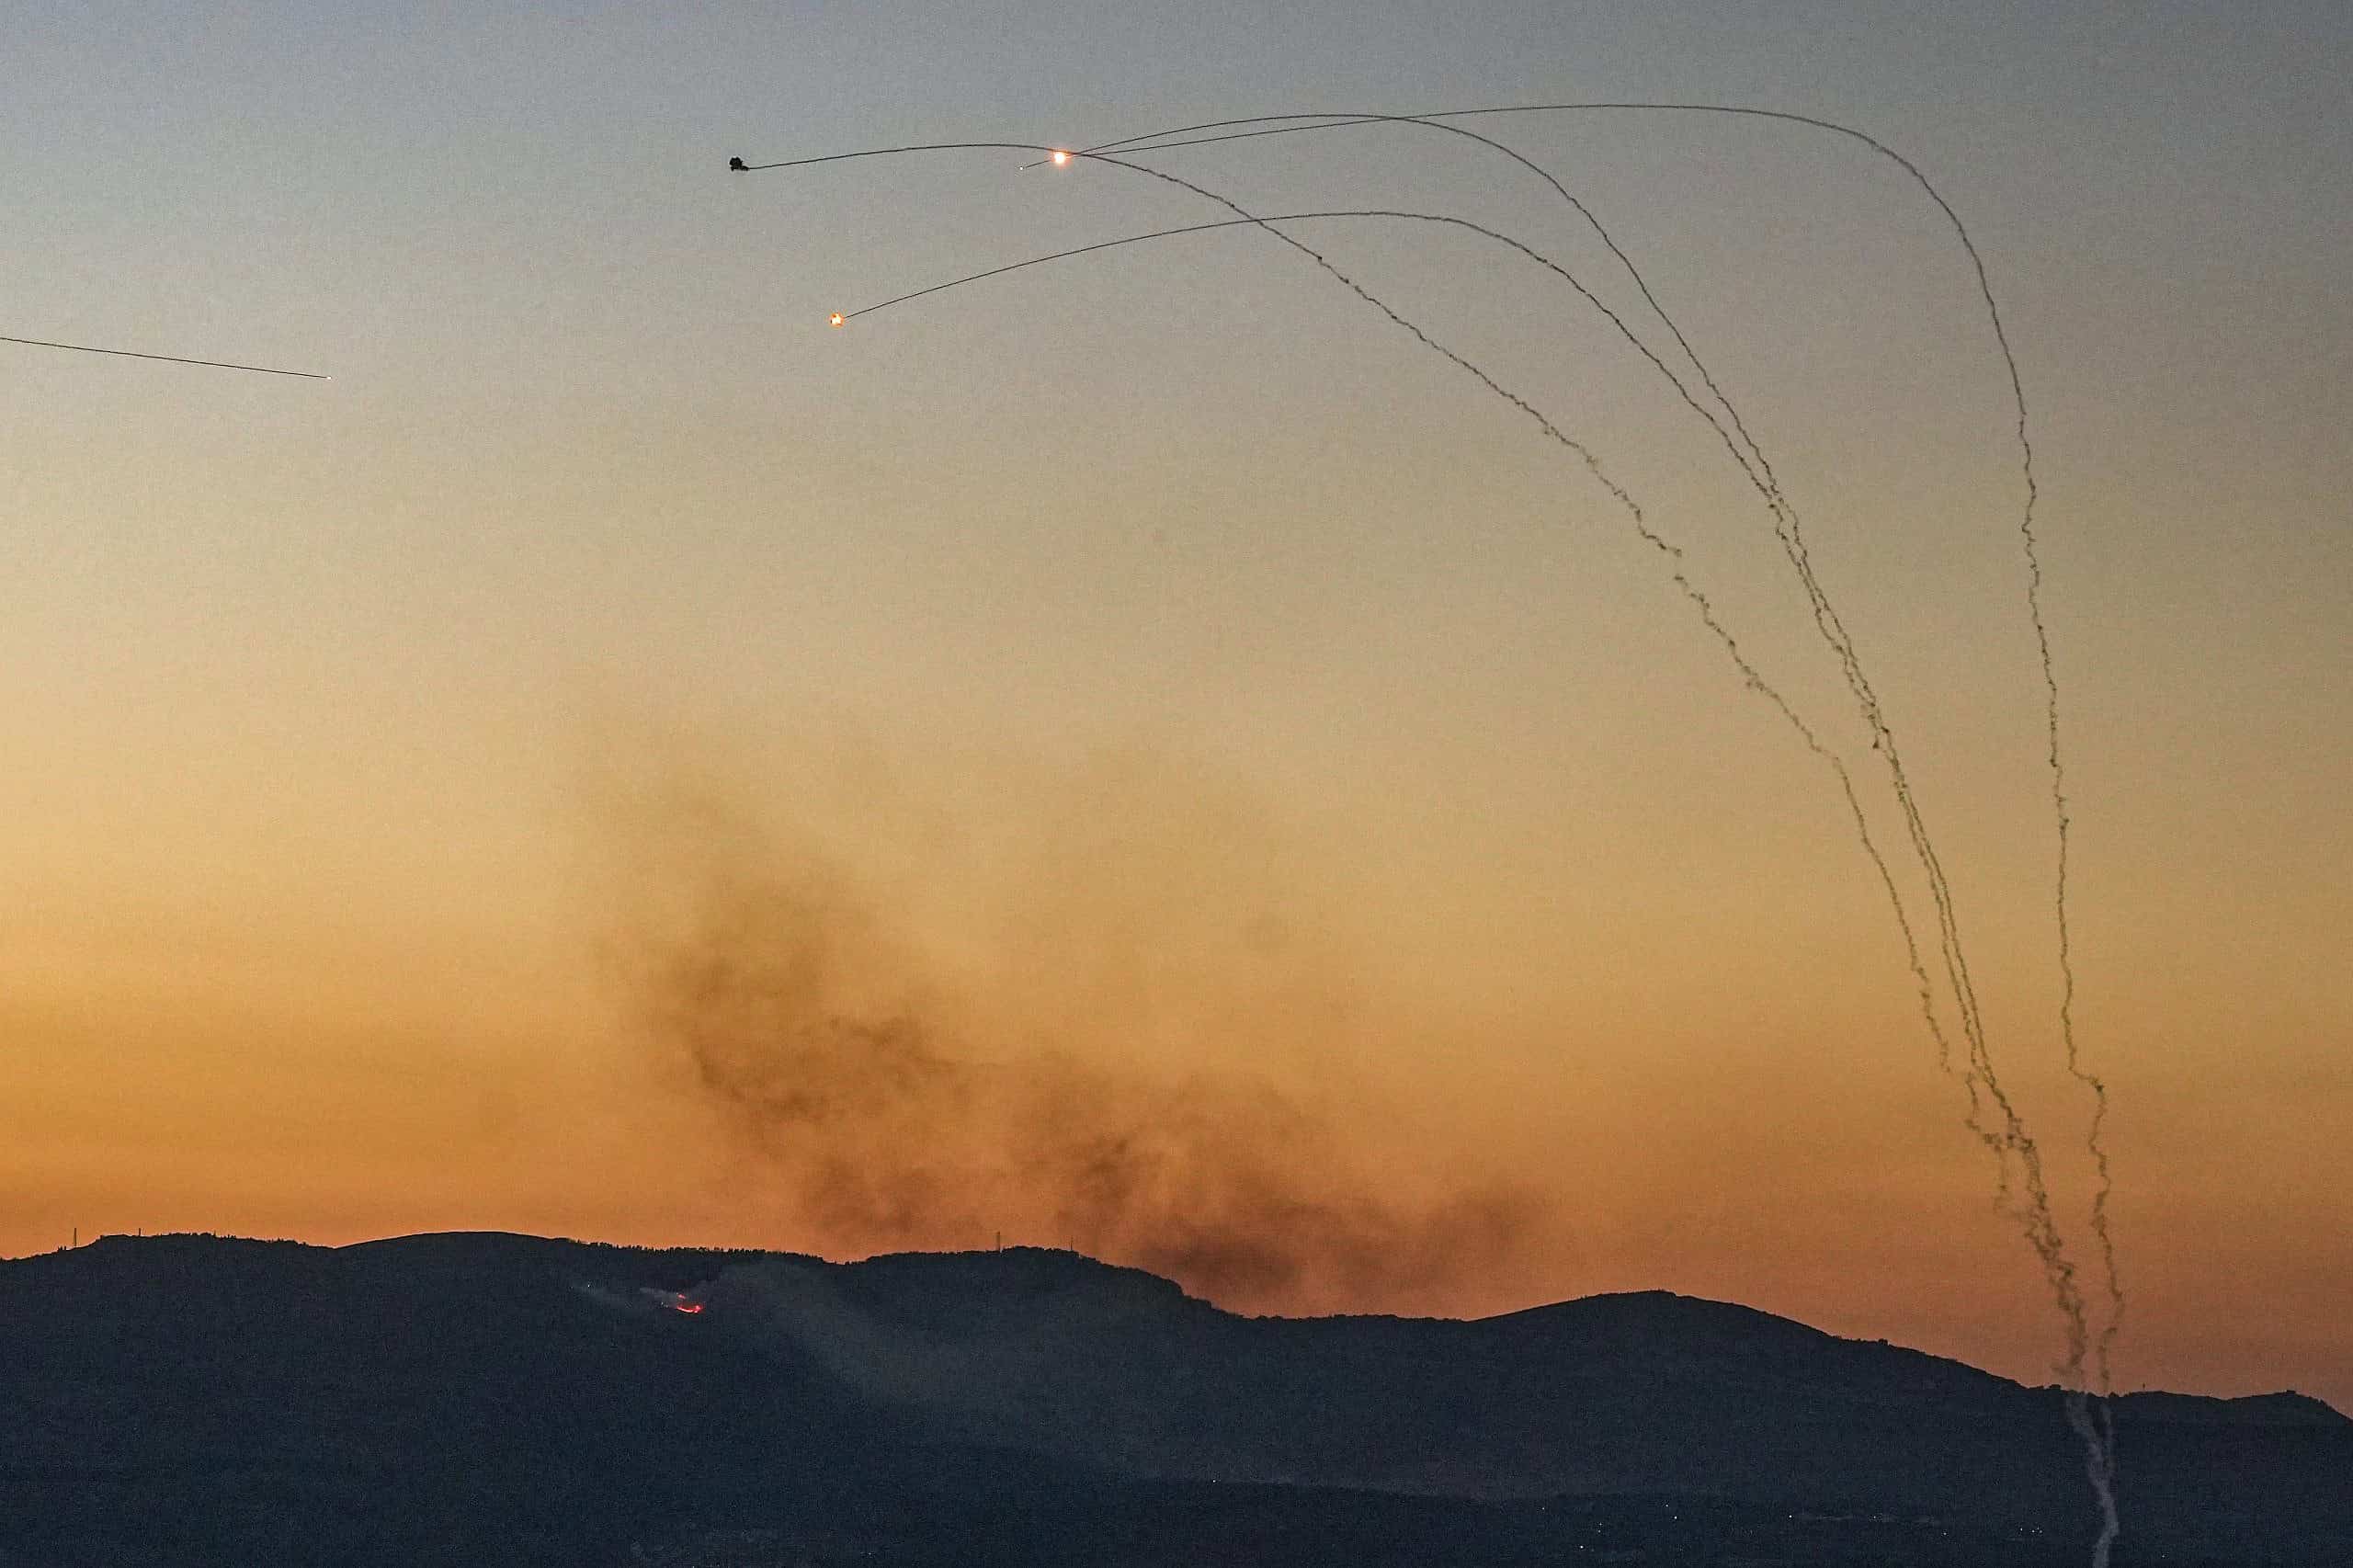 IAF hits Hezbollah sites in Lebanon amid ongoing rocket fire